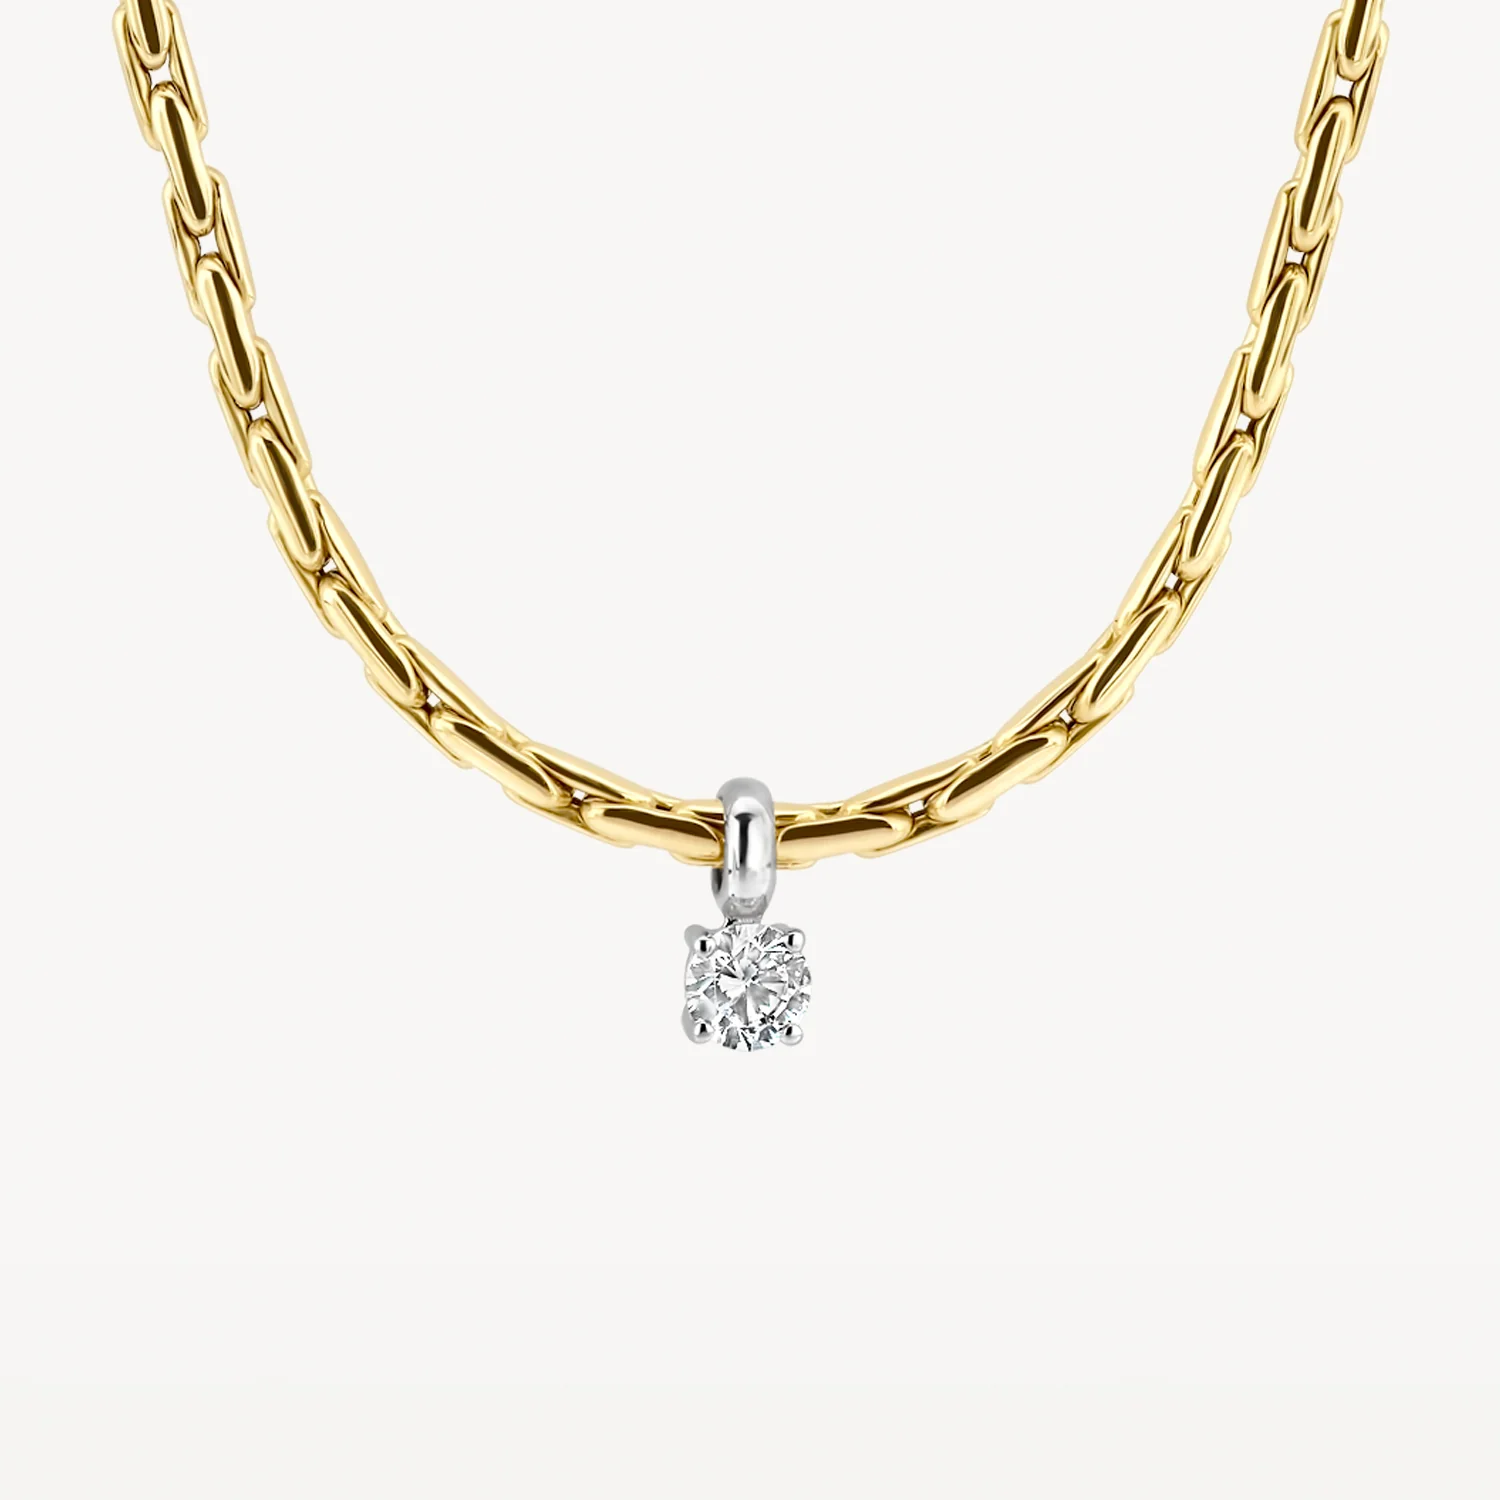 Blush Yellow Gold Fantasy Link Necklace with CZ Pendant